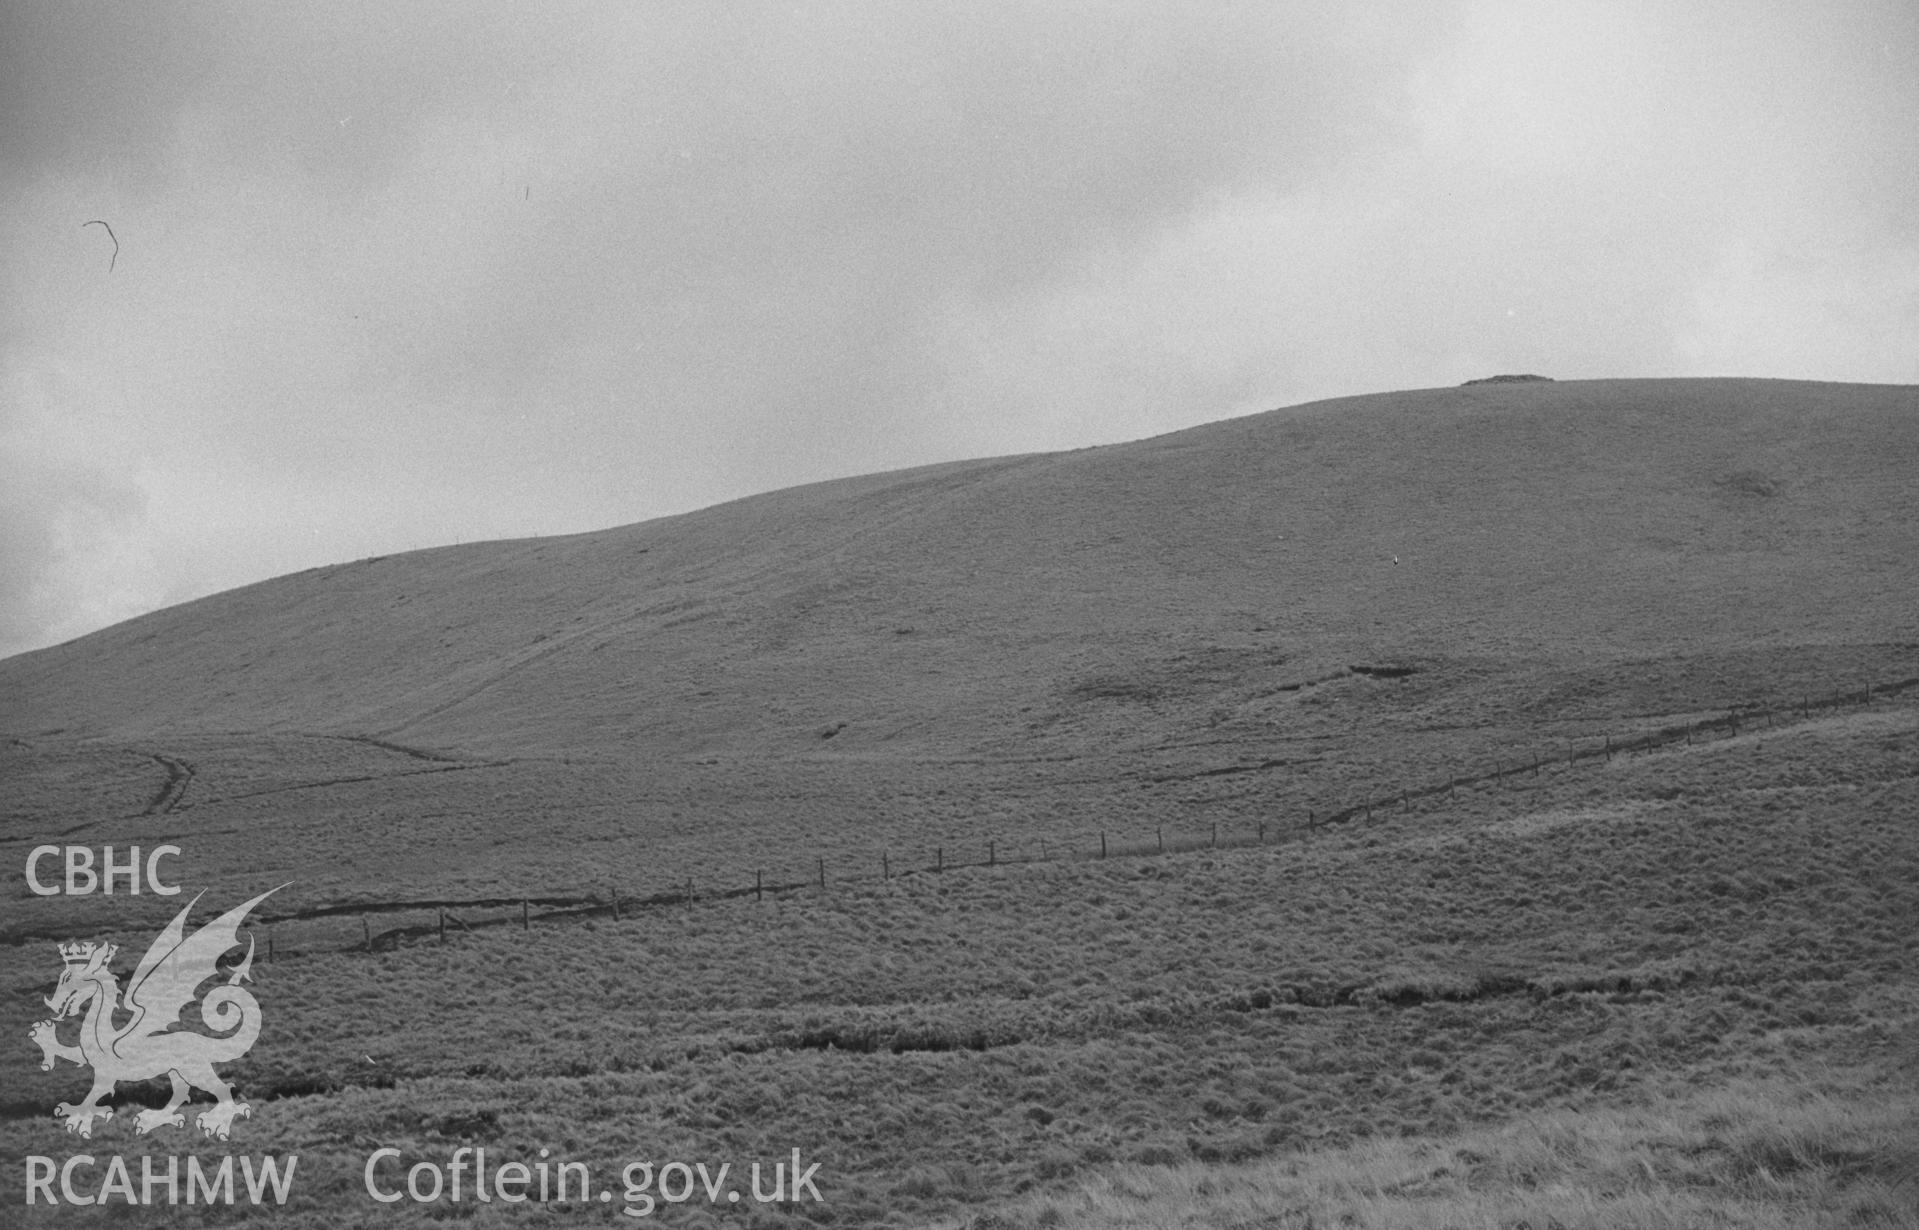 Digital copy of black and white negative showing westerly 1762ft cairn on skyline on right, ditch and bank of Gwys-yr-Ychen-Bannog running down slope to left. Photographed by Arthur O. Chater in April 1966 looking east north east from Grid Ref SN 734 611.